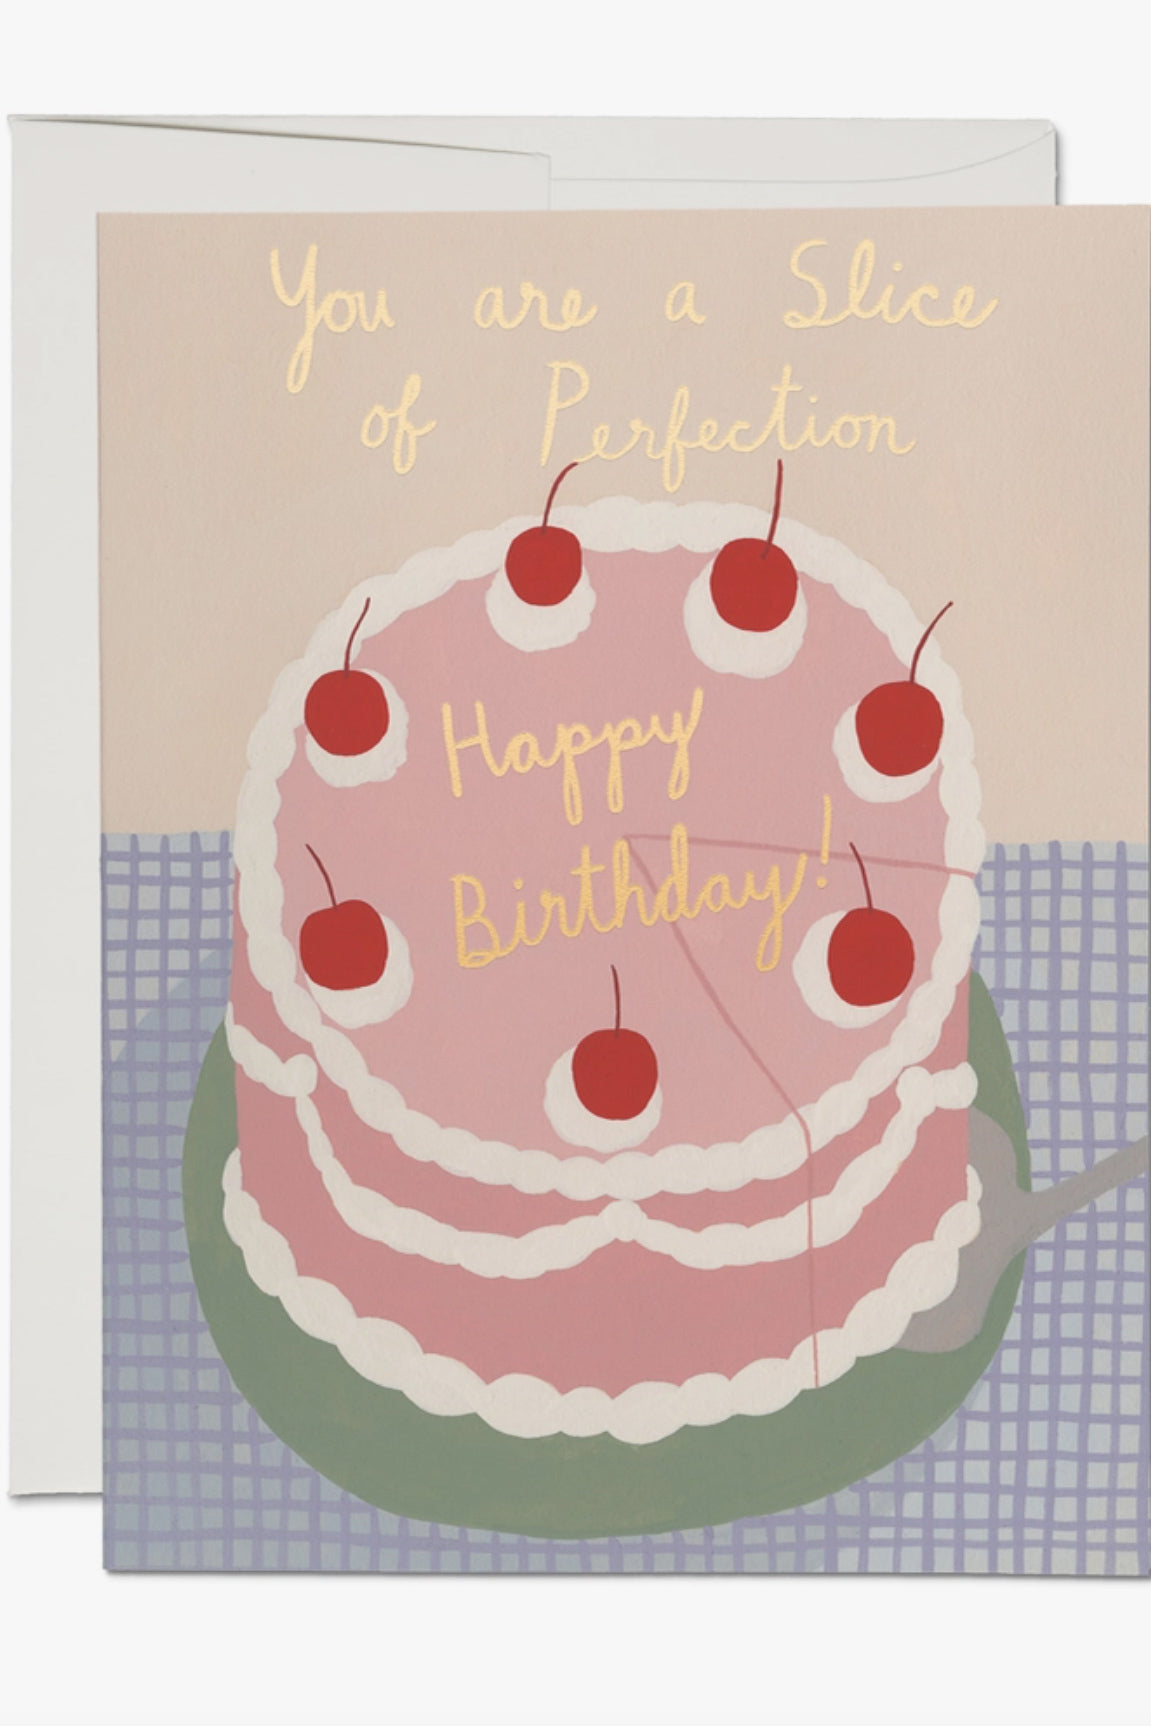 Red Cap Cards - Slice of Perfection Birthday Card